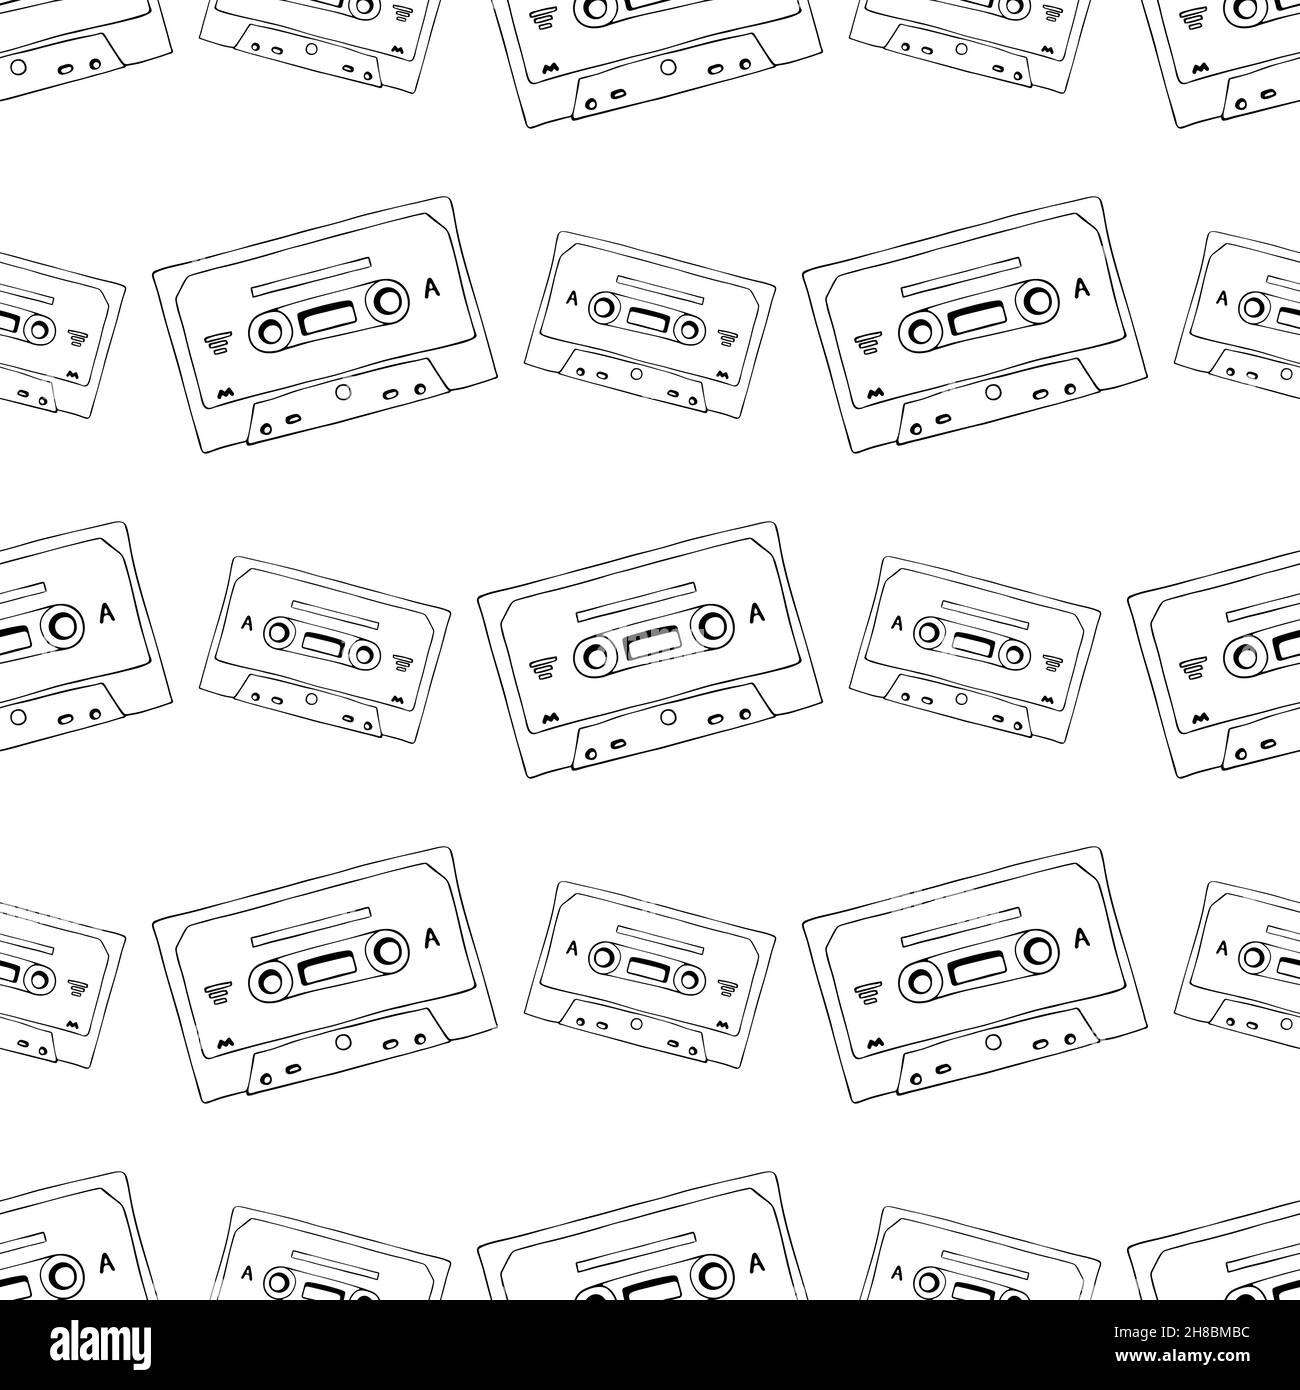 Hand drawn cassette and mixtape seamless pattern, black and white cartoon doodle background for music technology or audio equipment concept. Stock Vector